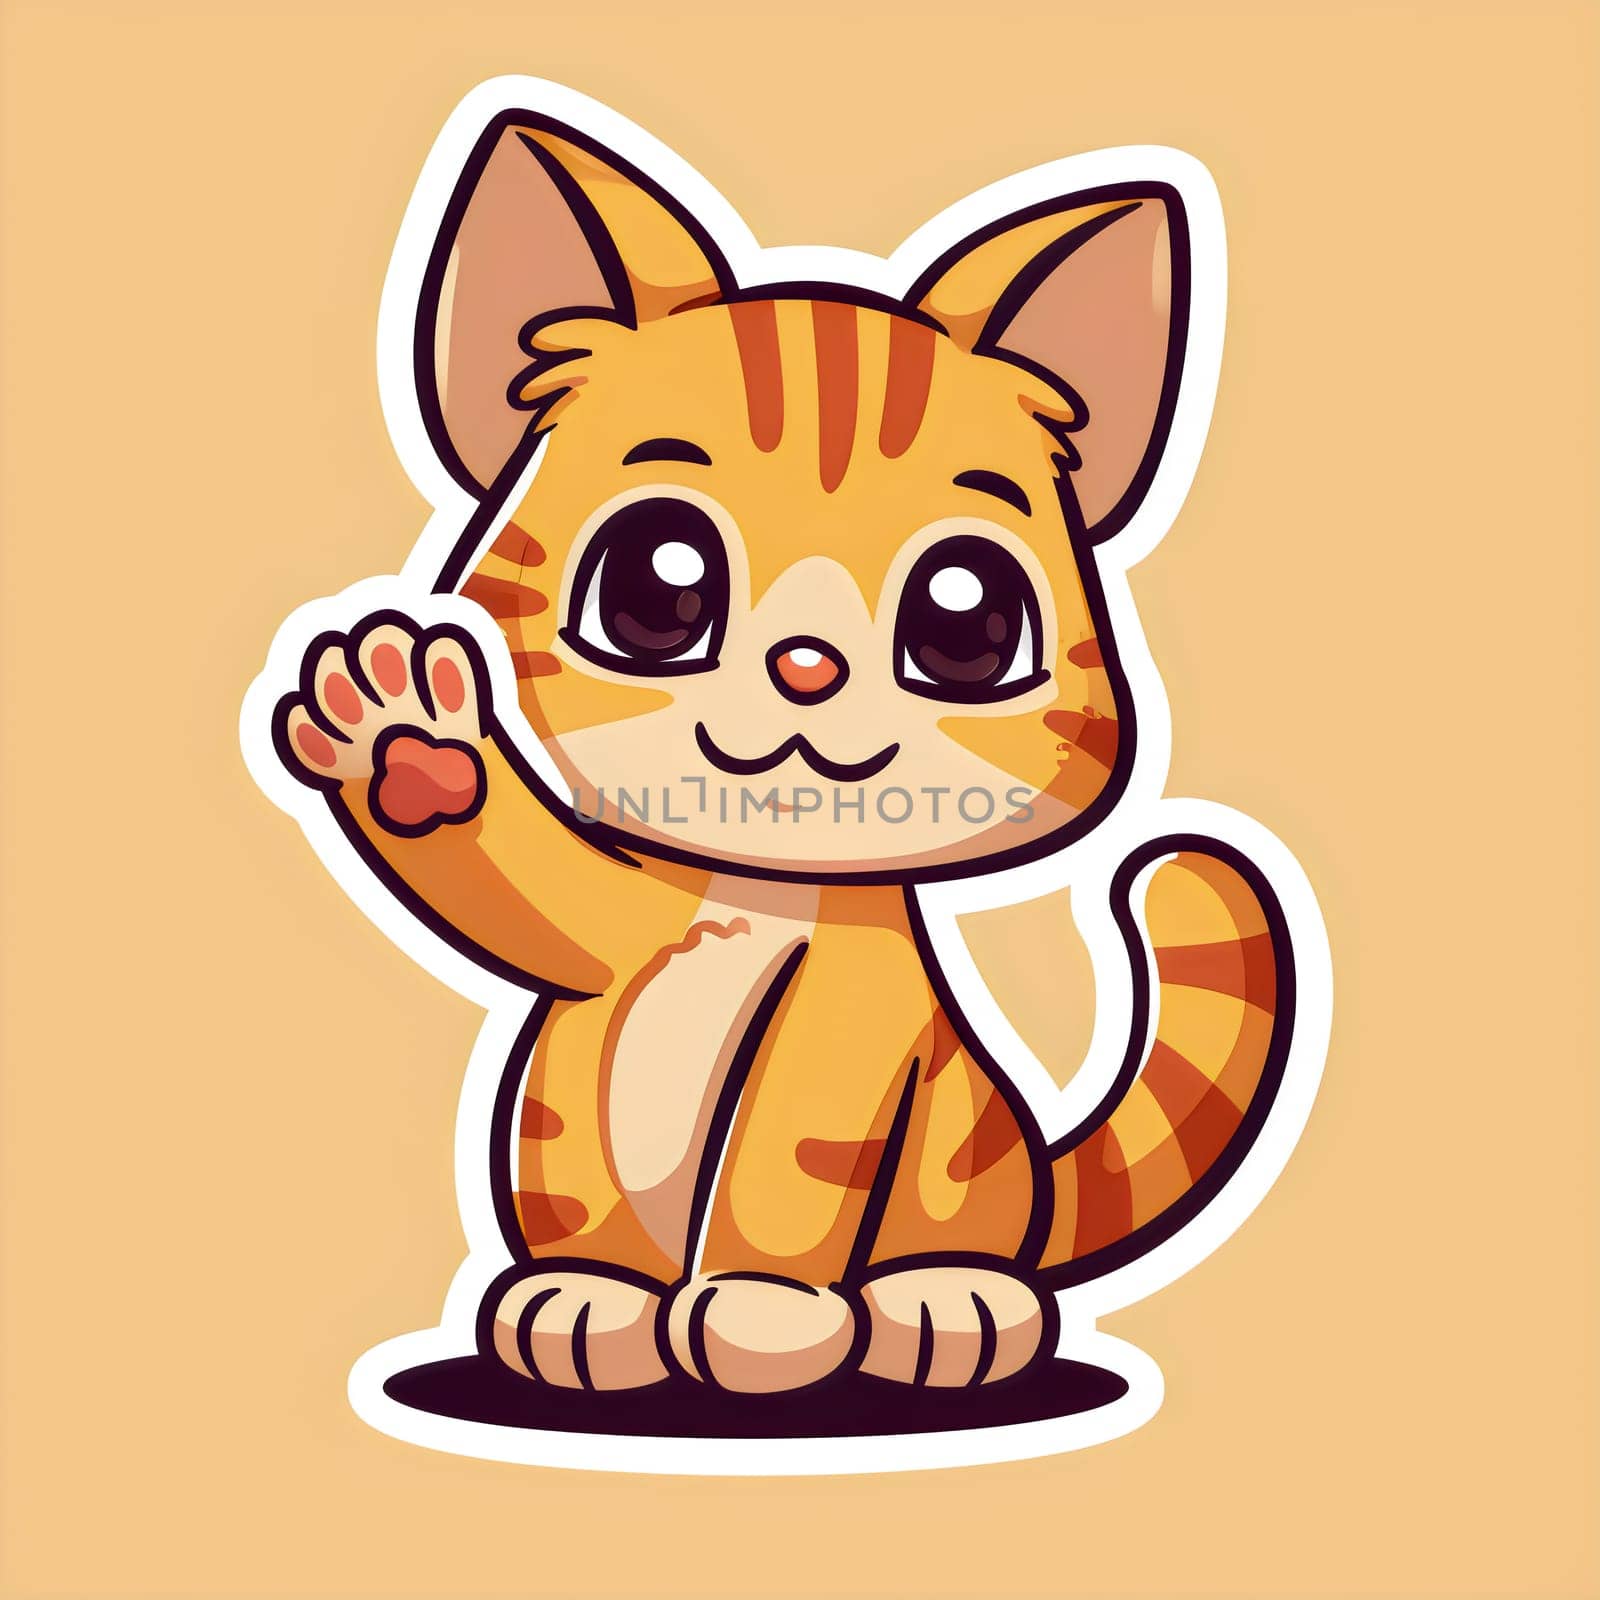 An endearing illustration of a tabby kitten with a friendly wave, in vibrant orange by chrisroll